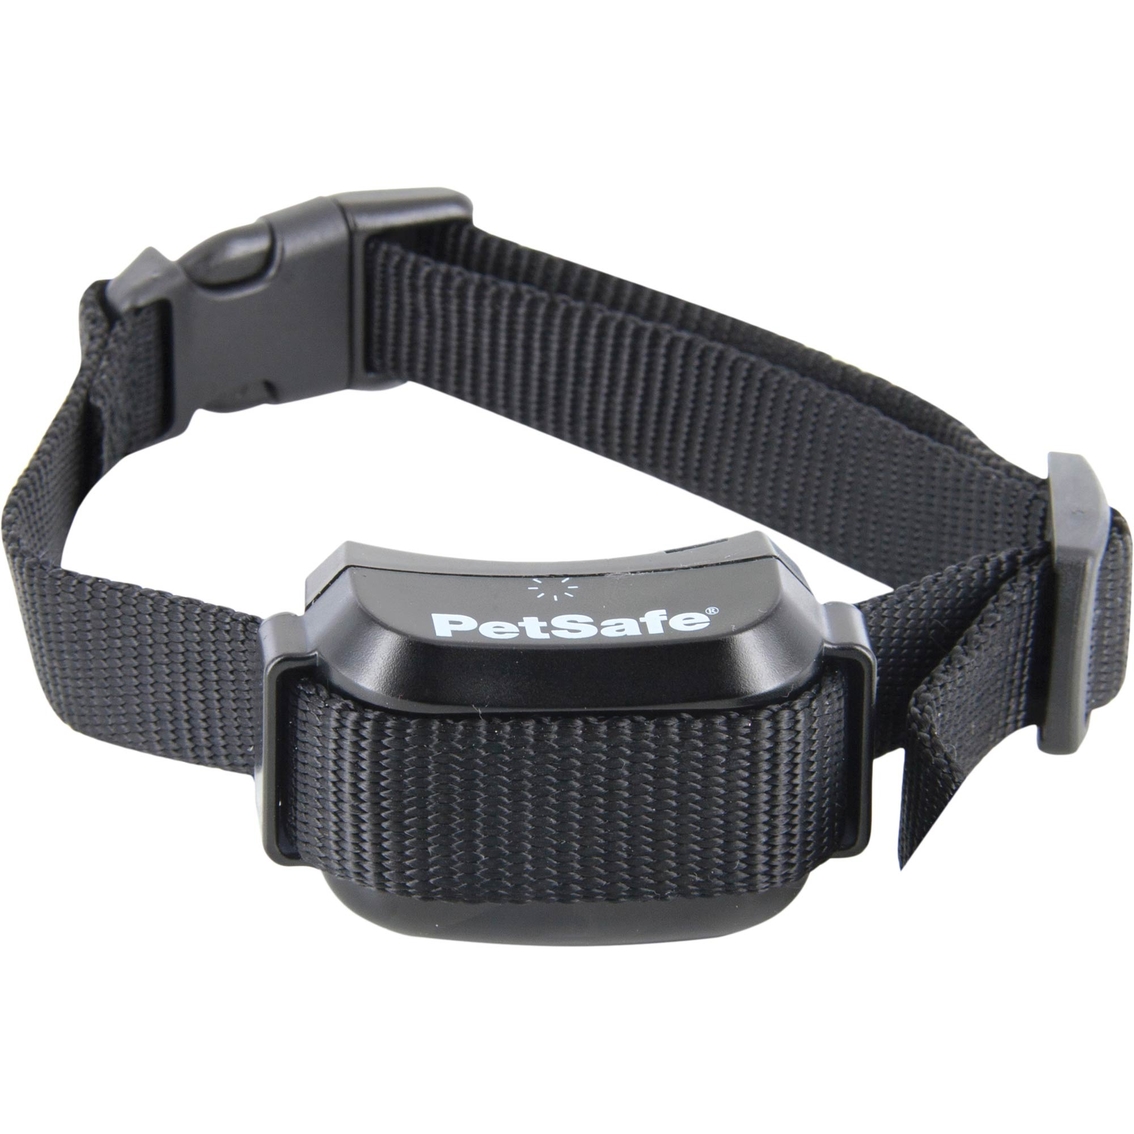 PetSafe YardMax Rechargeable In Ground Extra Receiver Collar - Image 2 of 3